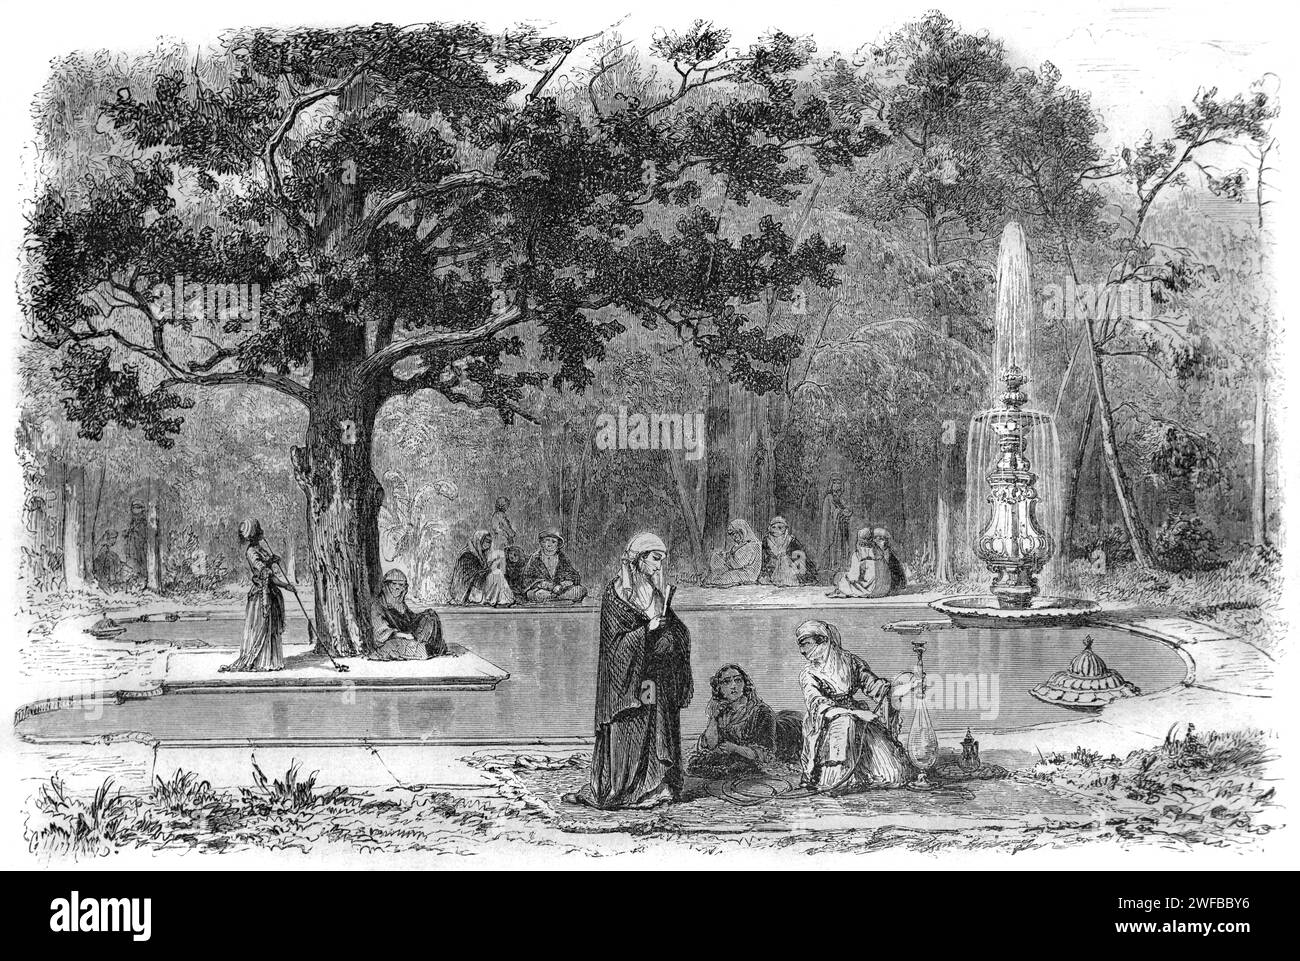 Turkish Ottoman Women from the Harem of Topkapi Palace Gather Round the Marble Fountain, Lime Tree, and Gardens of the Ihlamur Palace, a former Imperial Summer Pavilion, formerly known as Flamour Kiosk in Istanbul Turkey. Vintage or Historical Engraving or Illustration 1863 Stock Photo